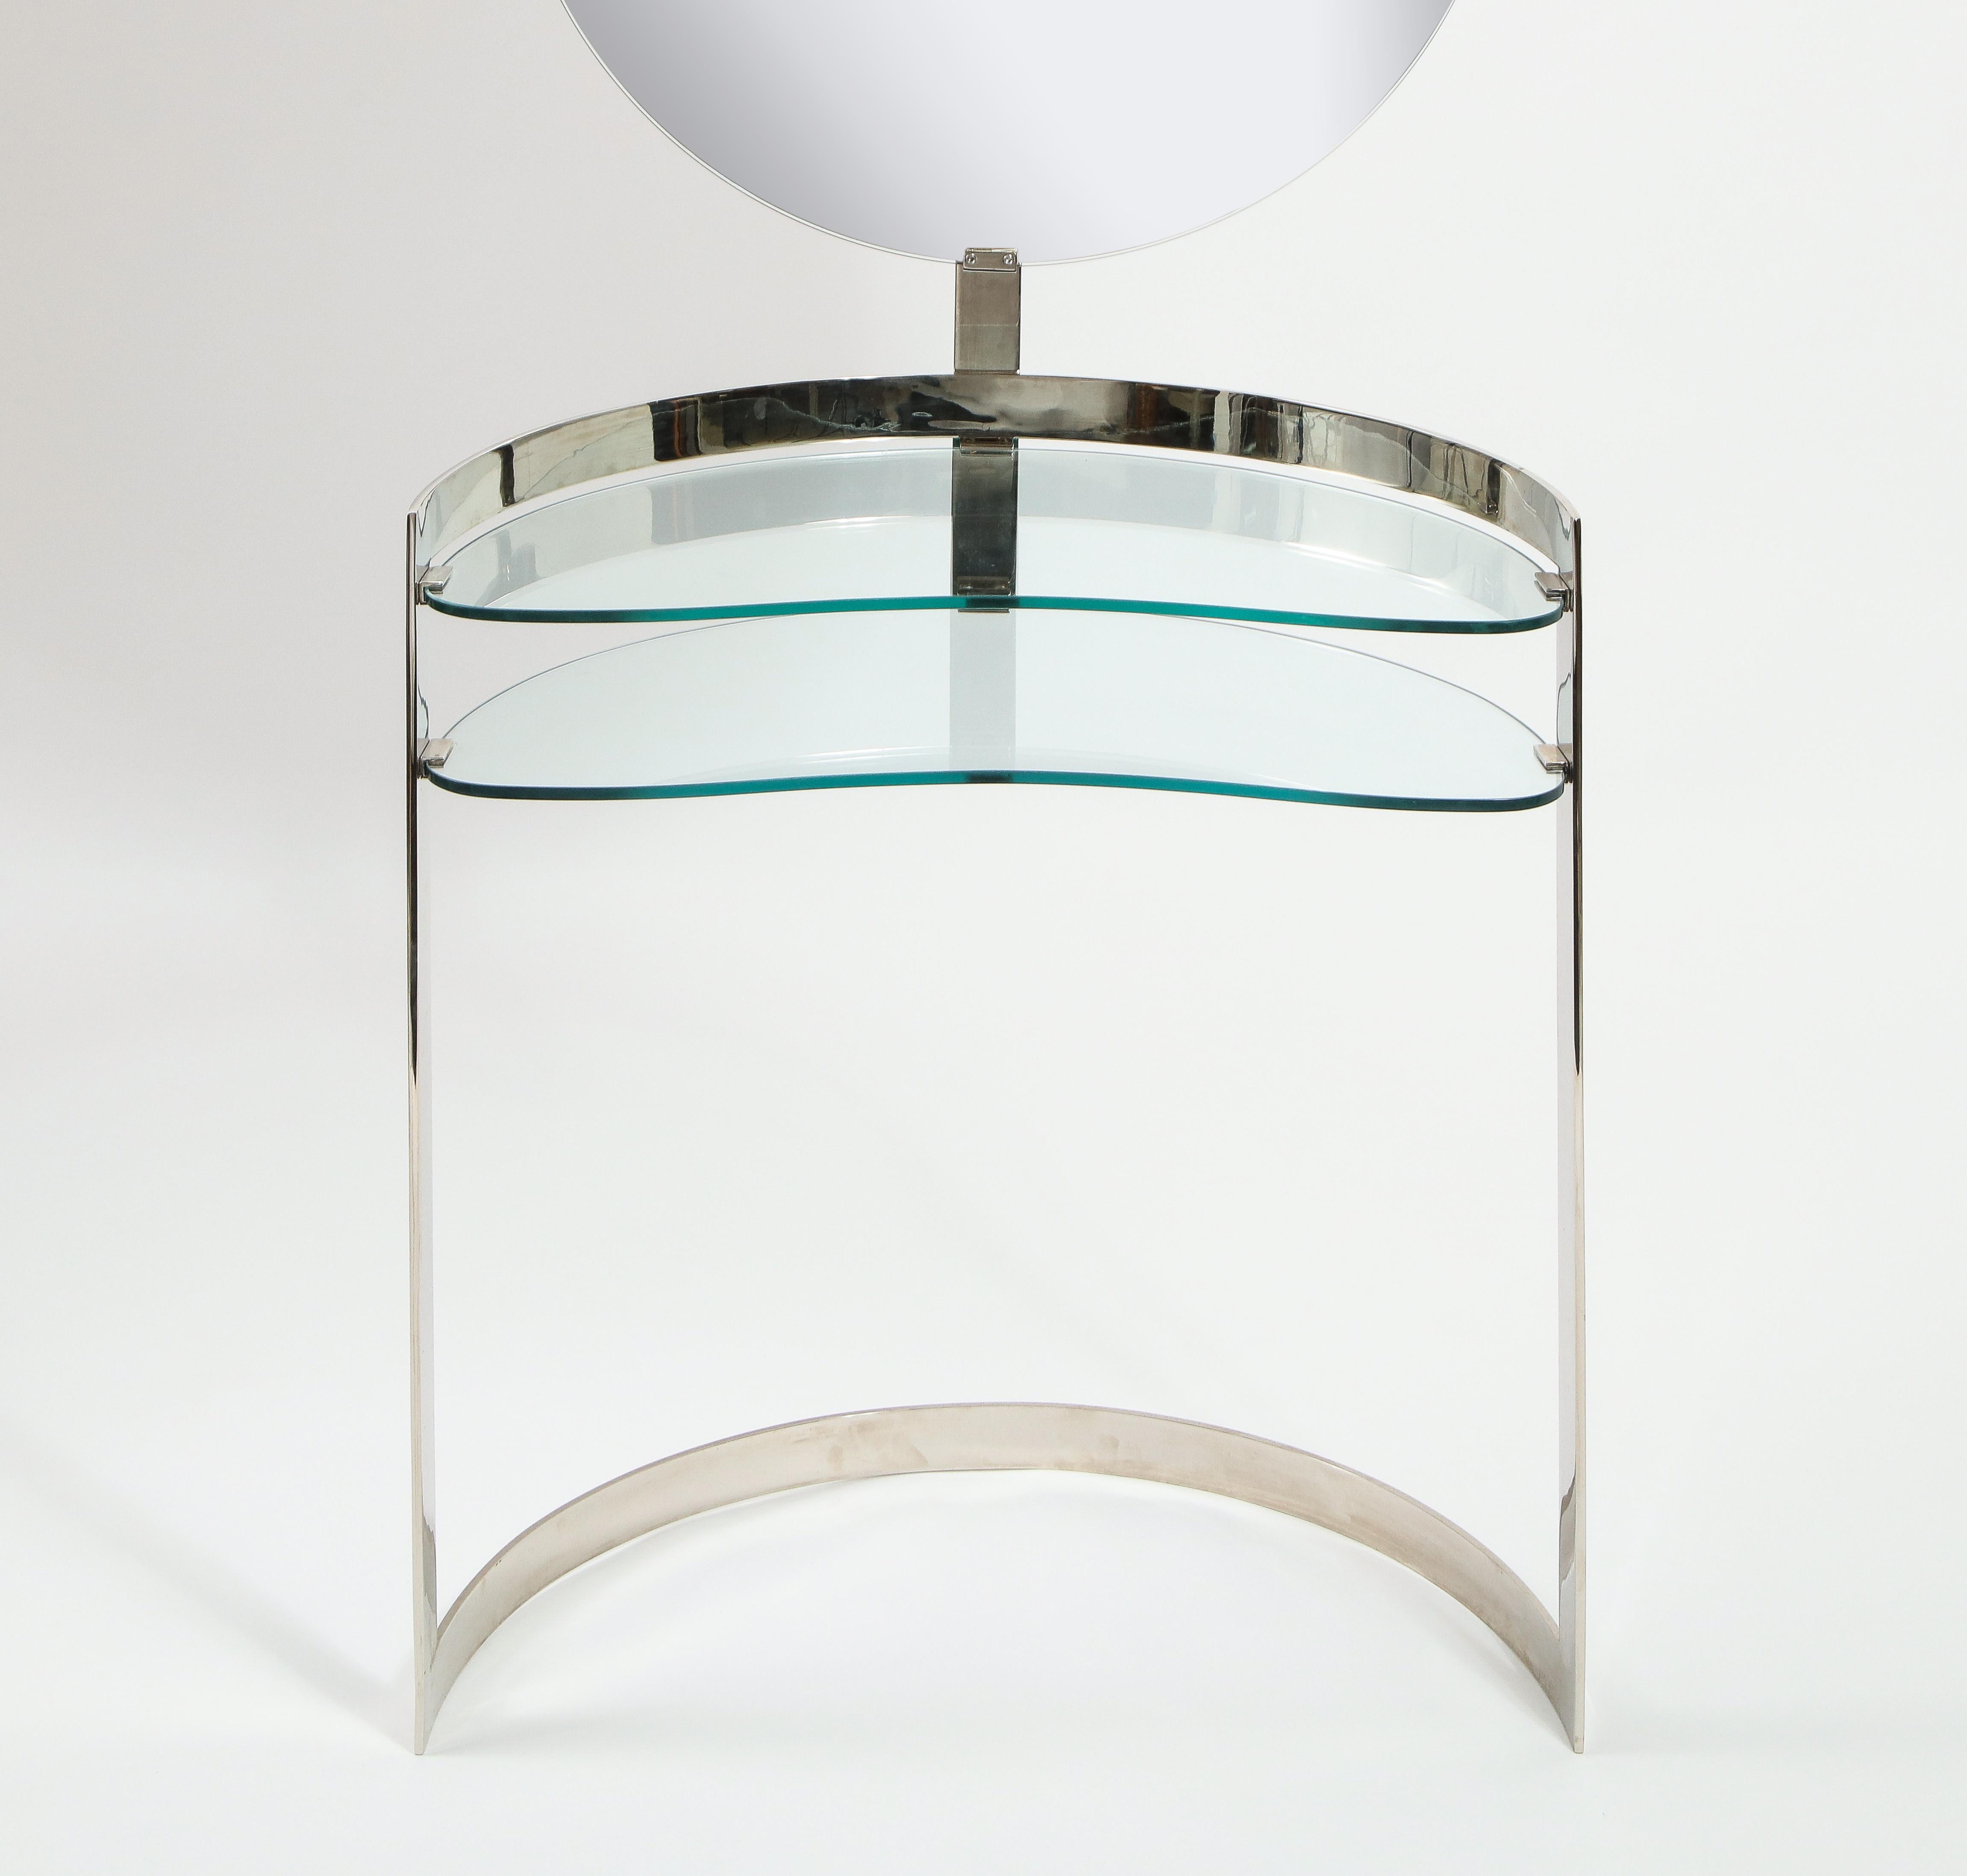 Nickel and glass vanity in the style of Boris Tabacoff with adjustable light, the two-tiered bean-shaped glass levels complement the curved shape of the frame, the mirror is backed in polished stainless so the vanity can be floated.